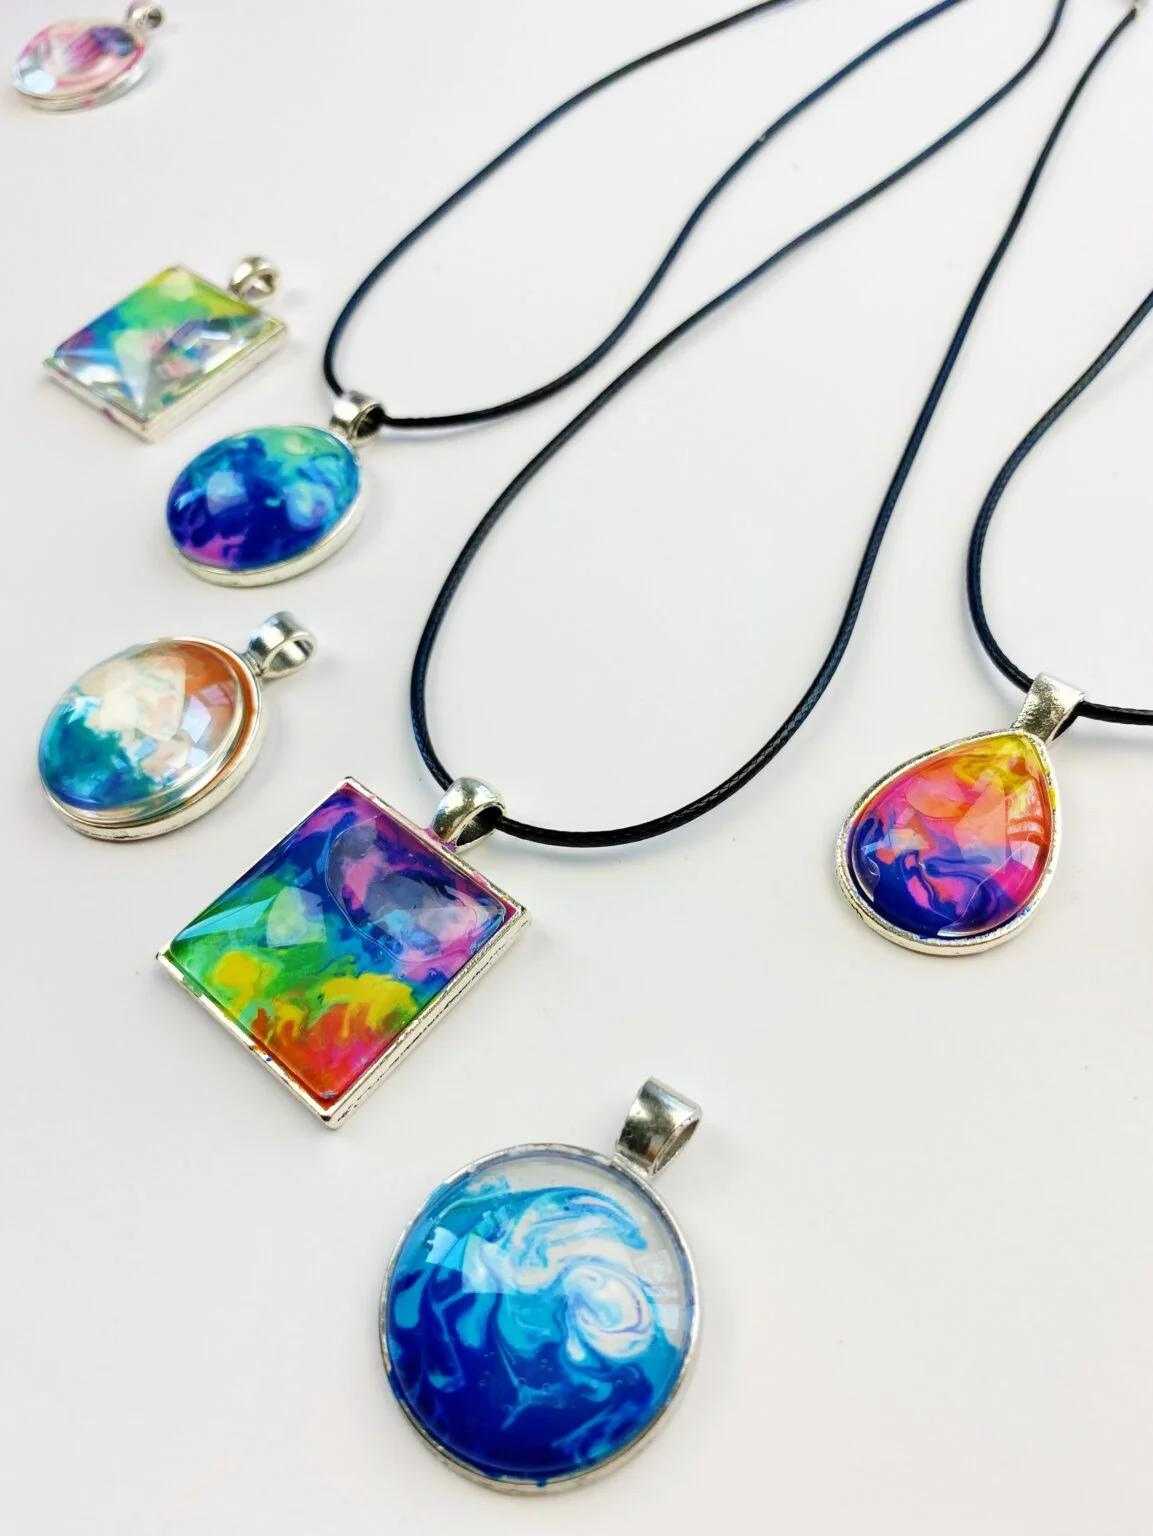 Melted crayon art jewelry